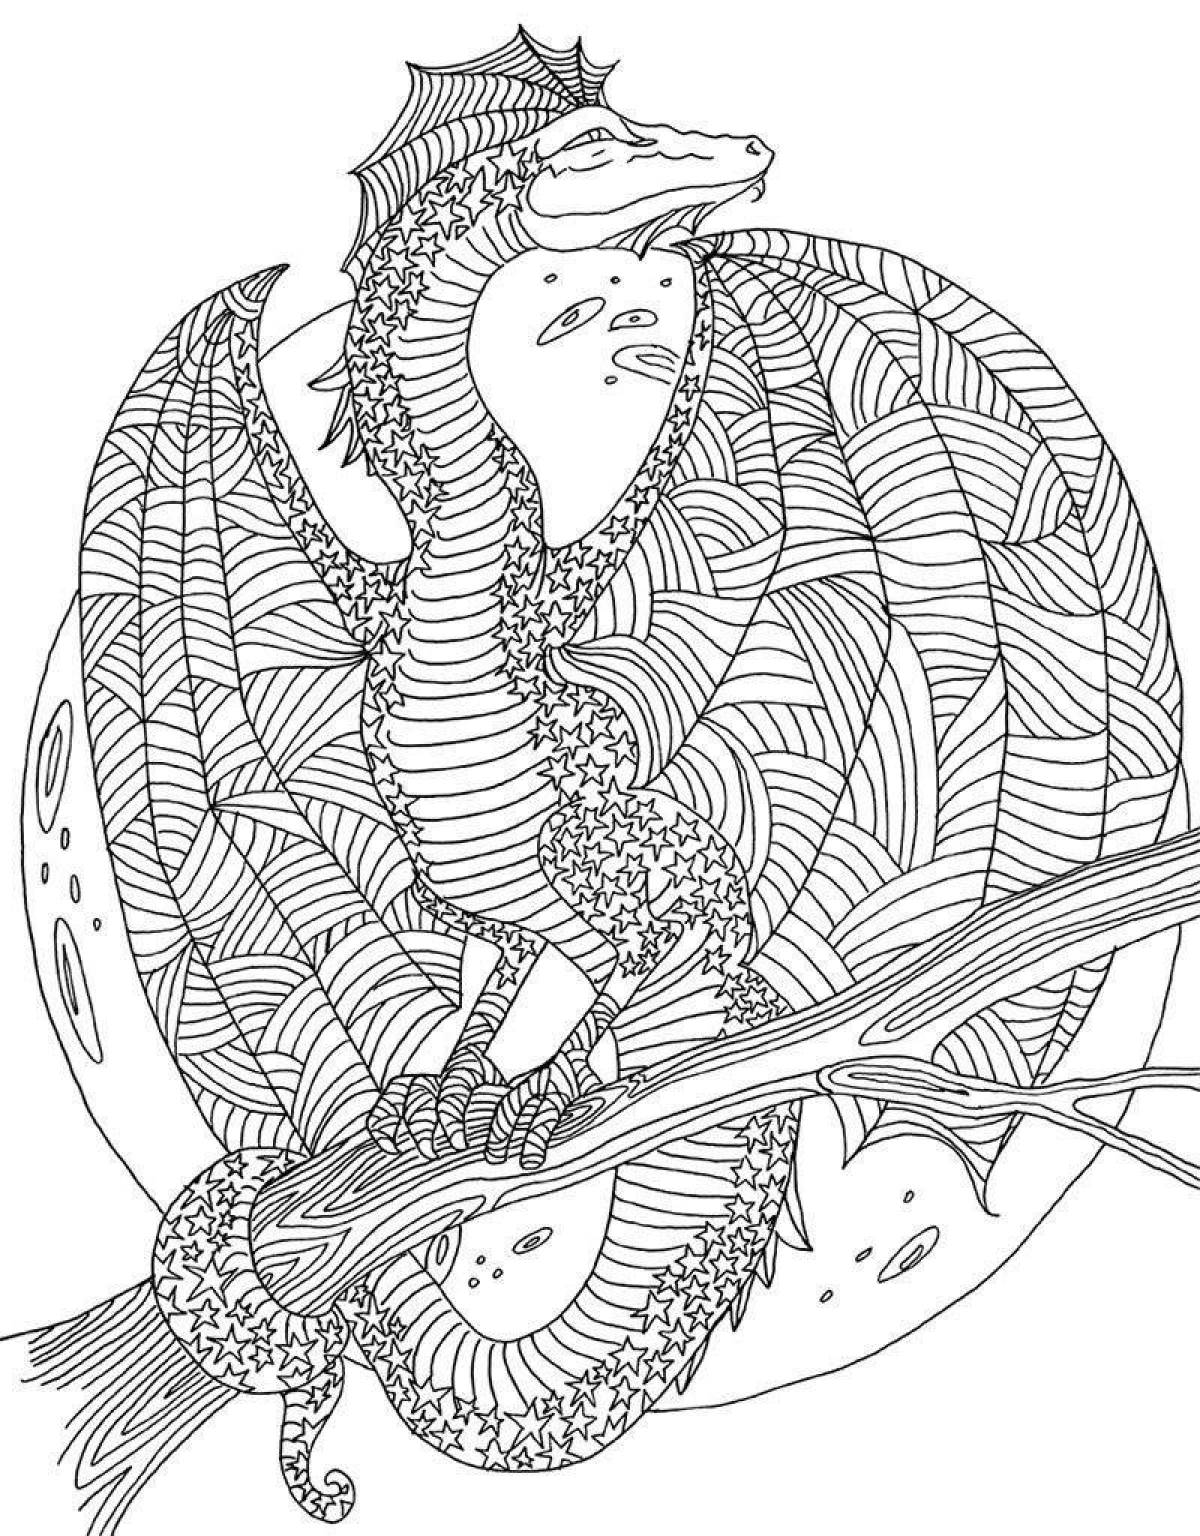 Amazing and challenging coloring book